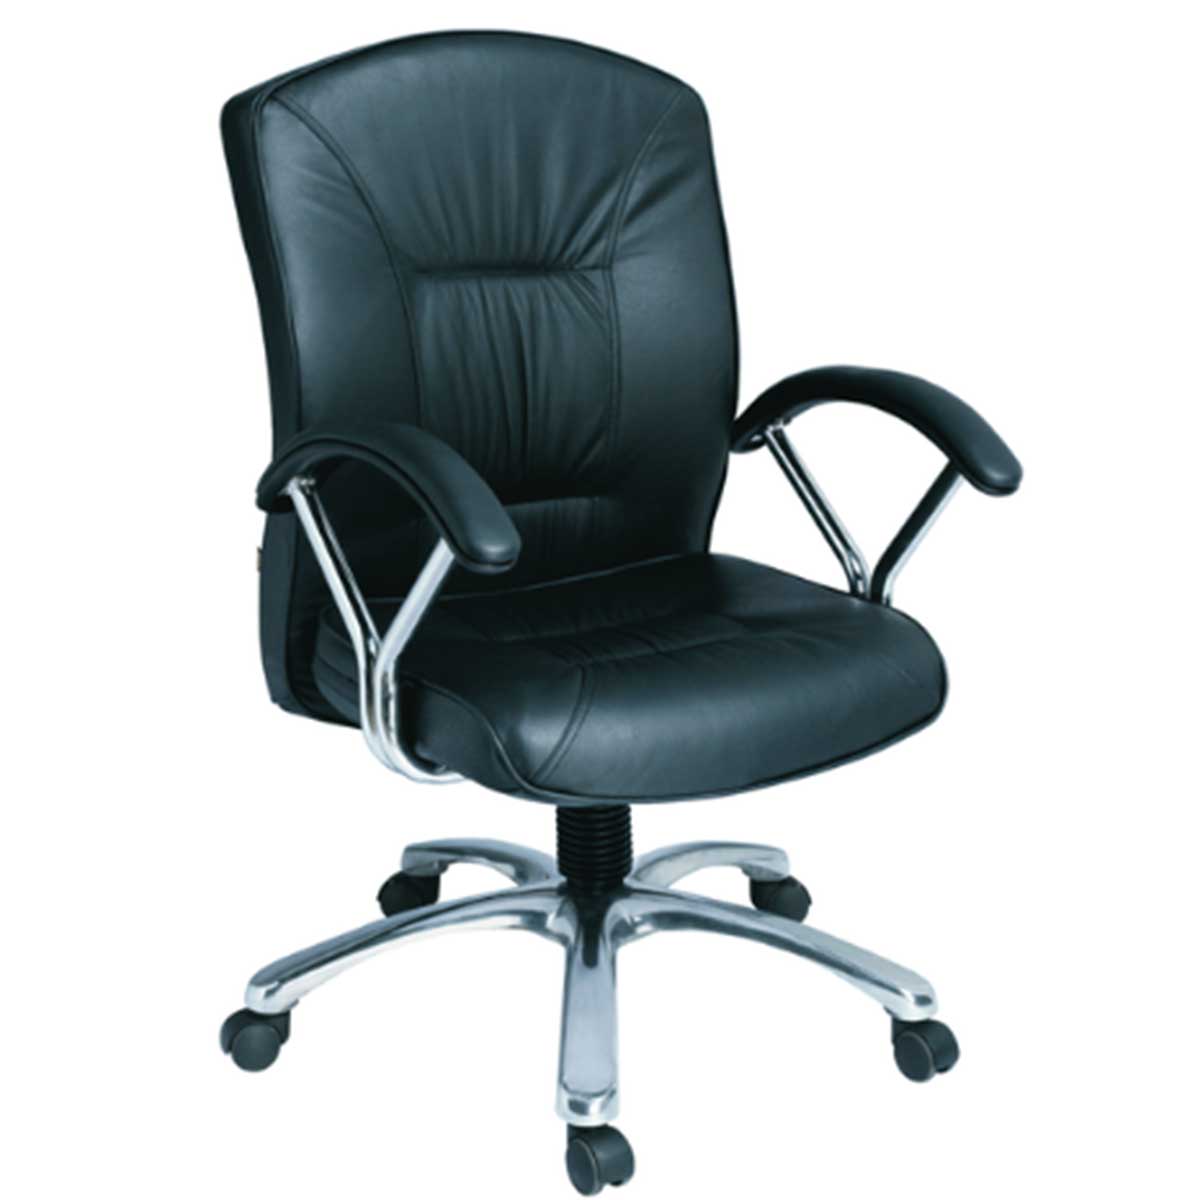 Godrej office chair Manufacturers, Suppliers in Yusuf Sarai